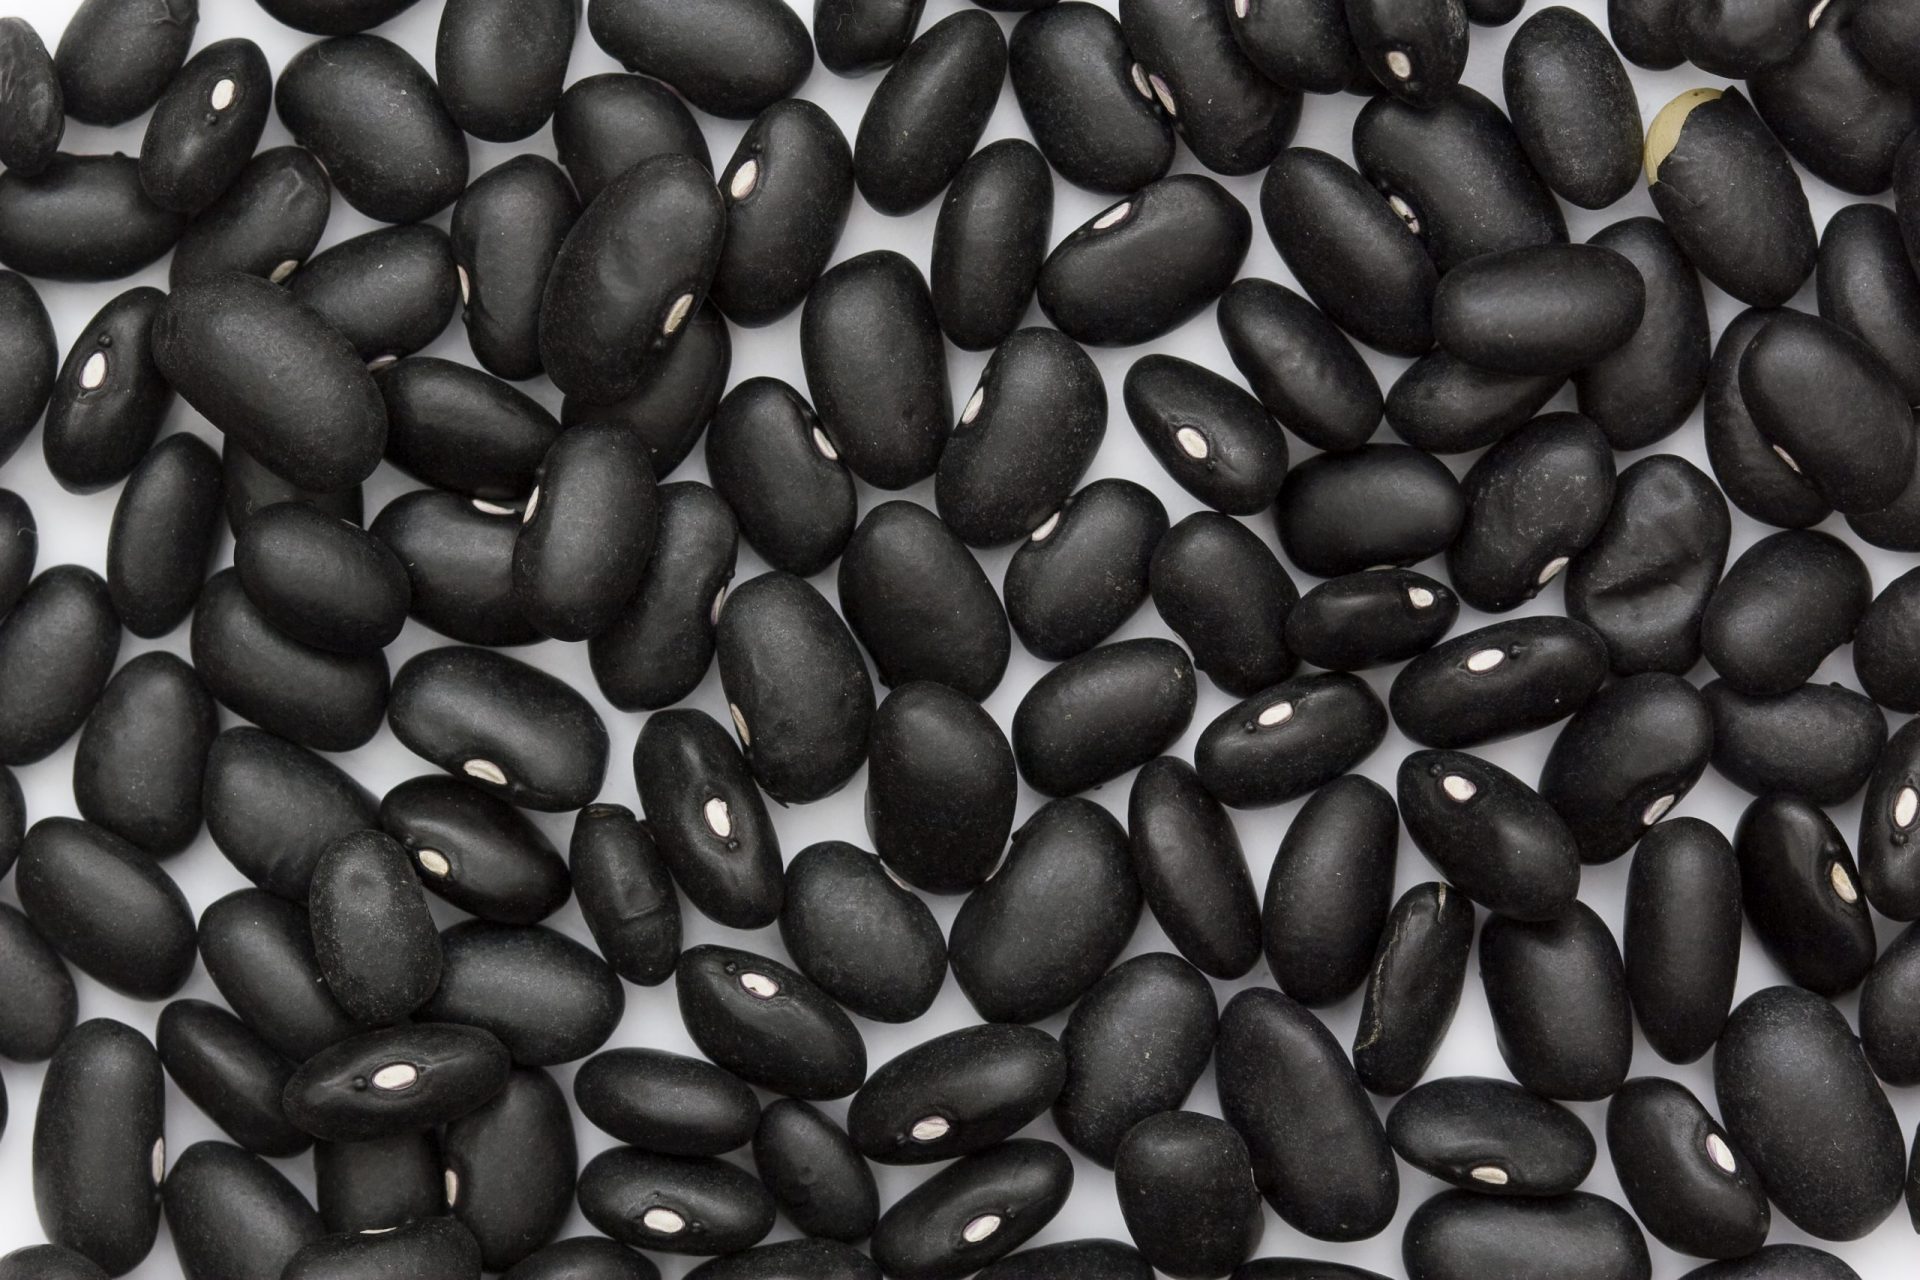 navy bean substitutes, navy beans substitutes, substitute navy beans, substitute for navy beans, substitution for navy beans, black beans